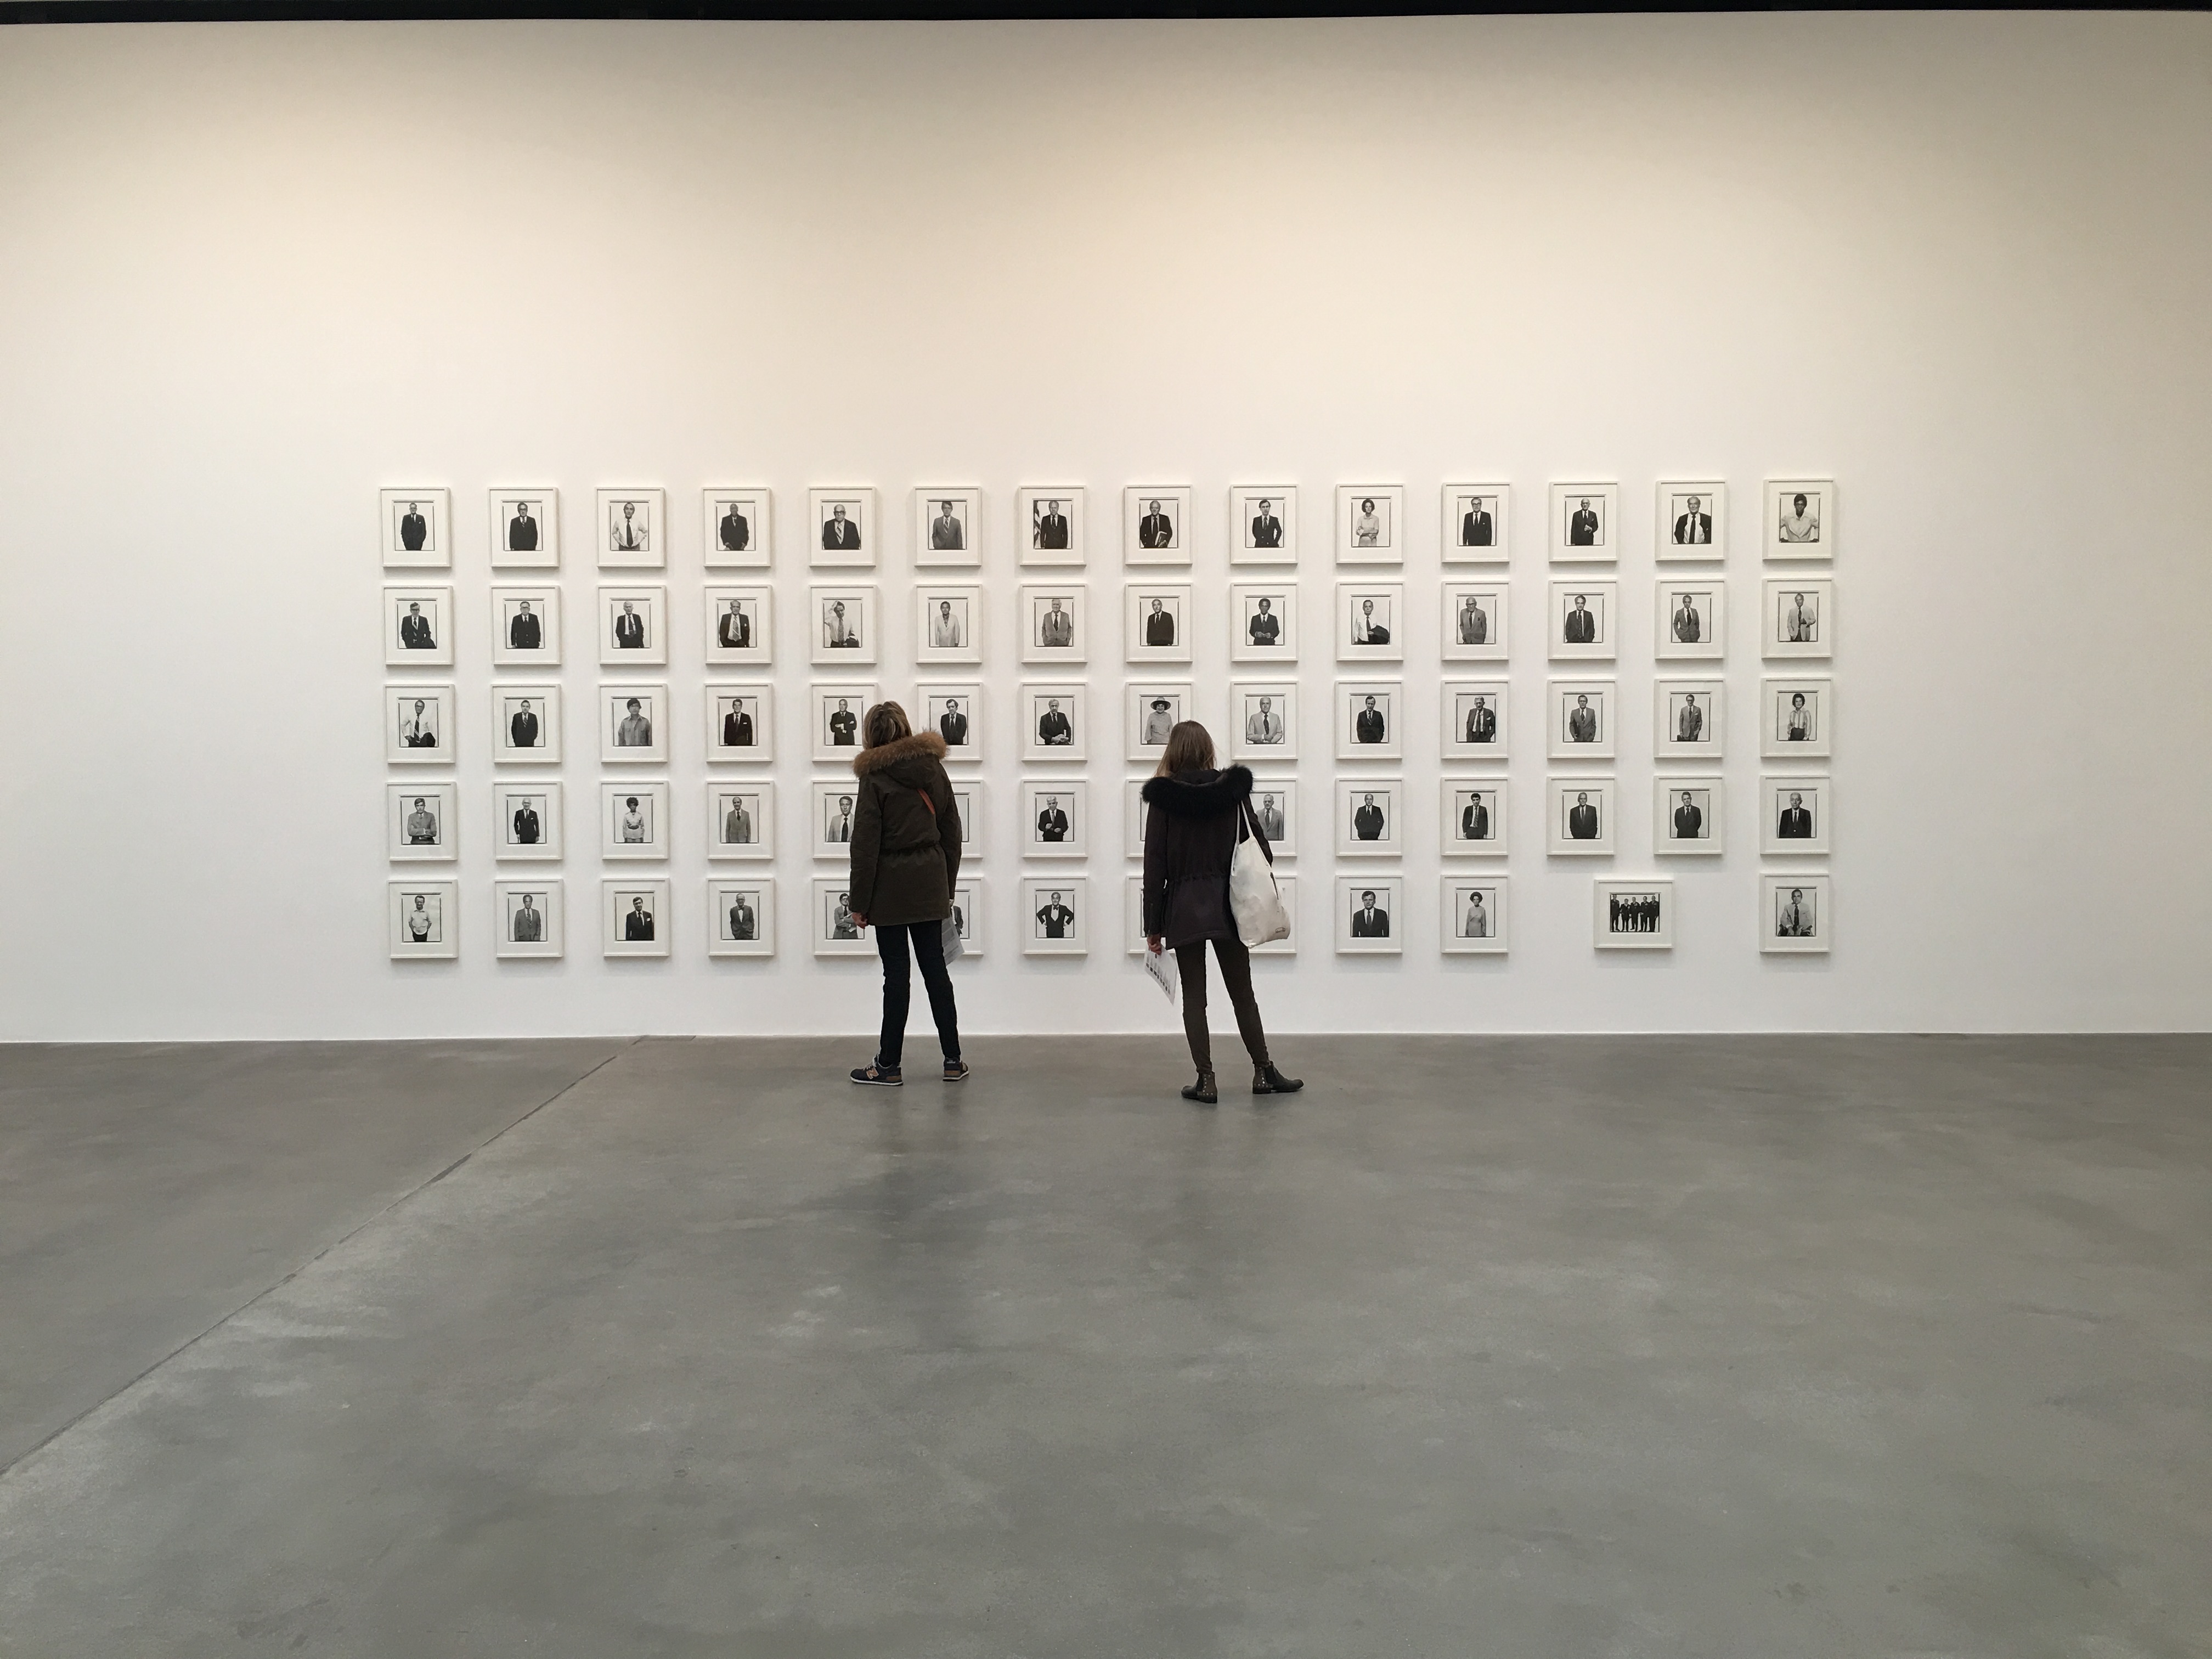 Richard Avedon's works, Andy Warhol's works, exhibition in Gagosian Gallery